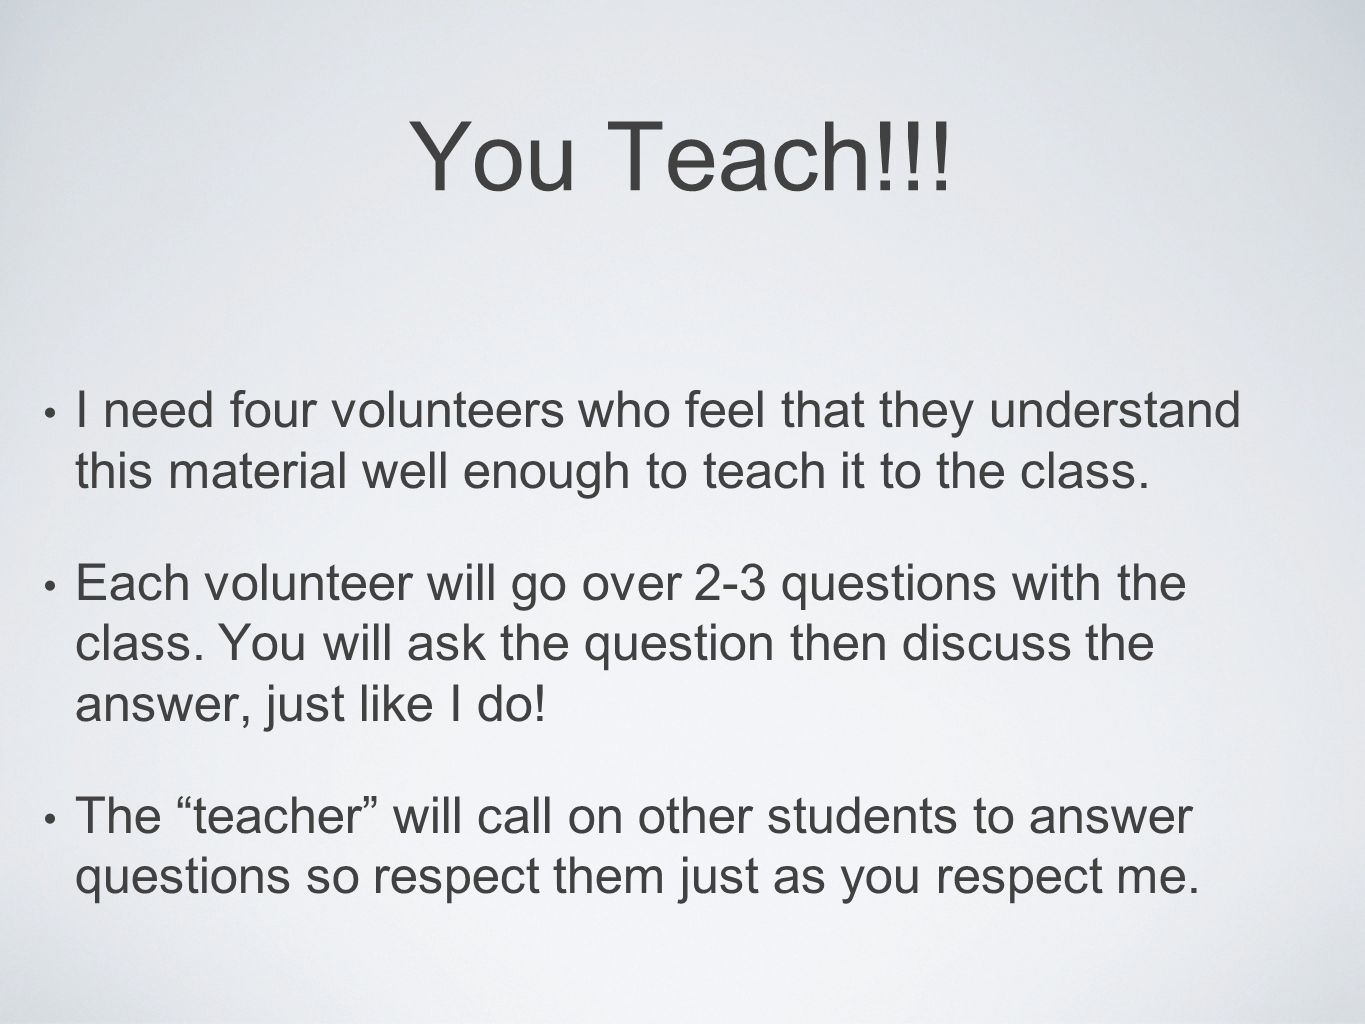 You Teach!!! I need four volunteers who feel that they understand this material well enough to teach it to the class.